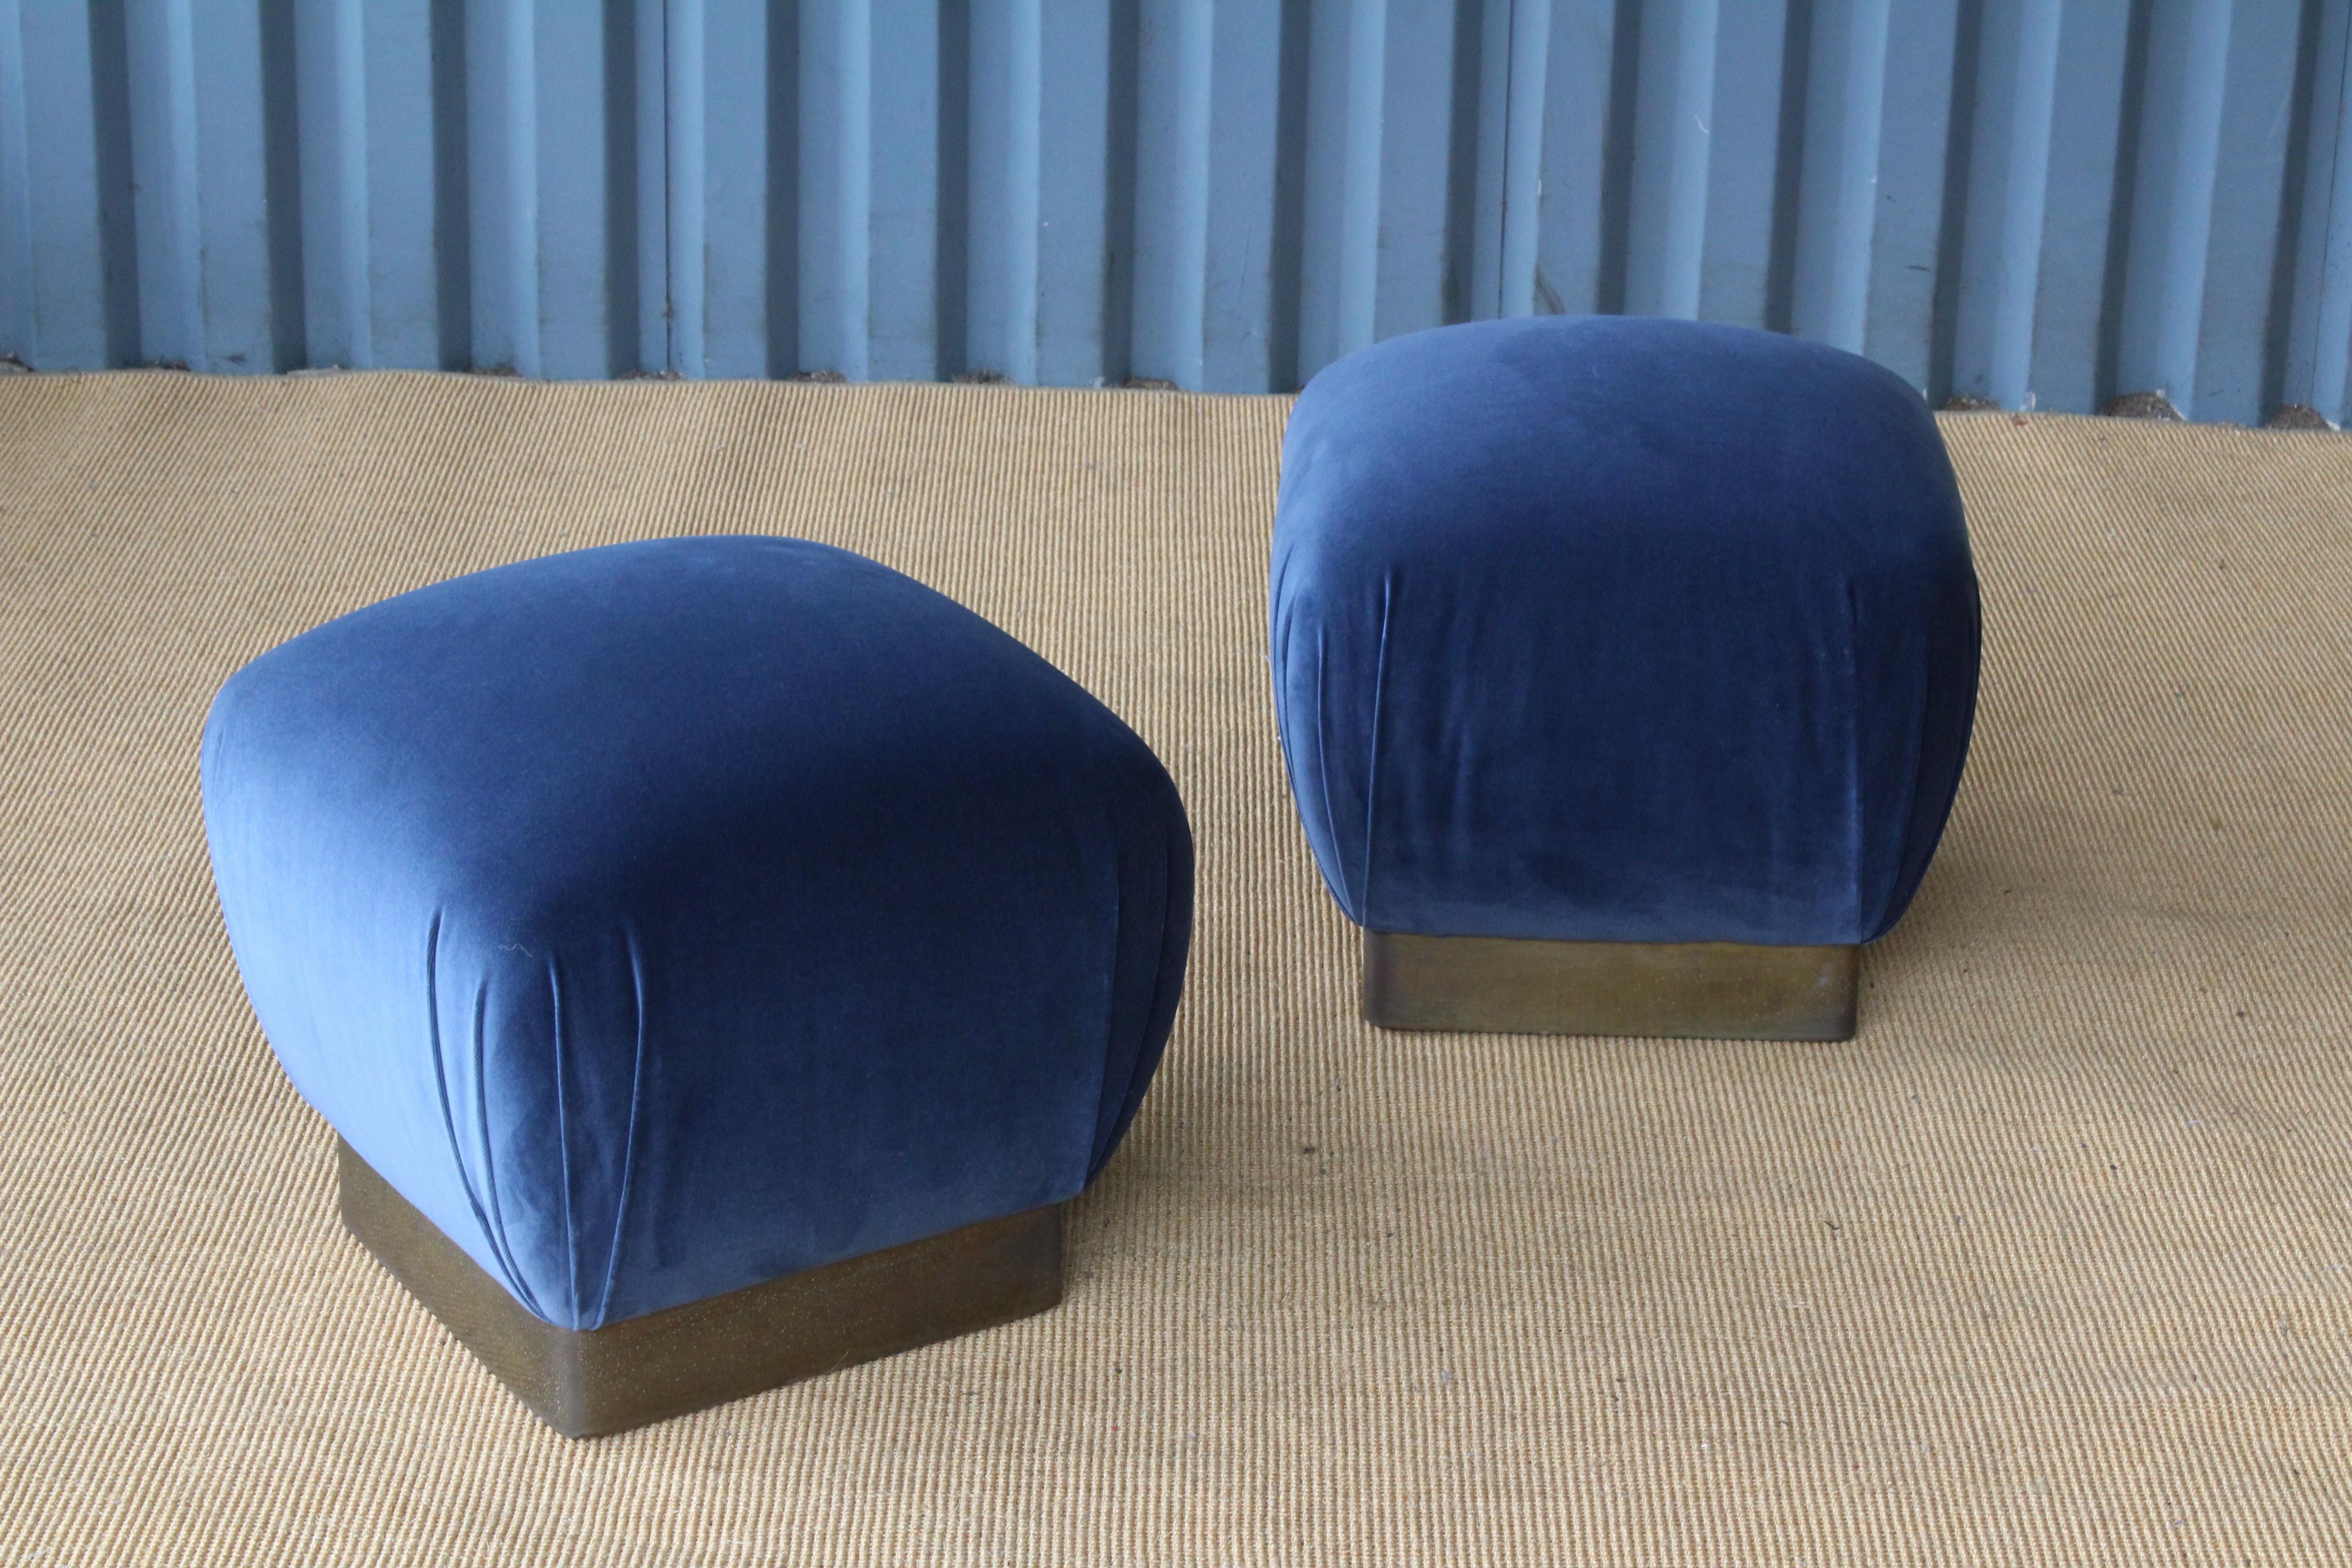 Pair of Ottomans or Stools in the Style of Karl Springer, 1970s (amerikanisch)